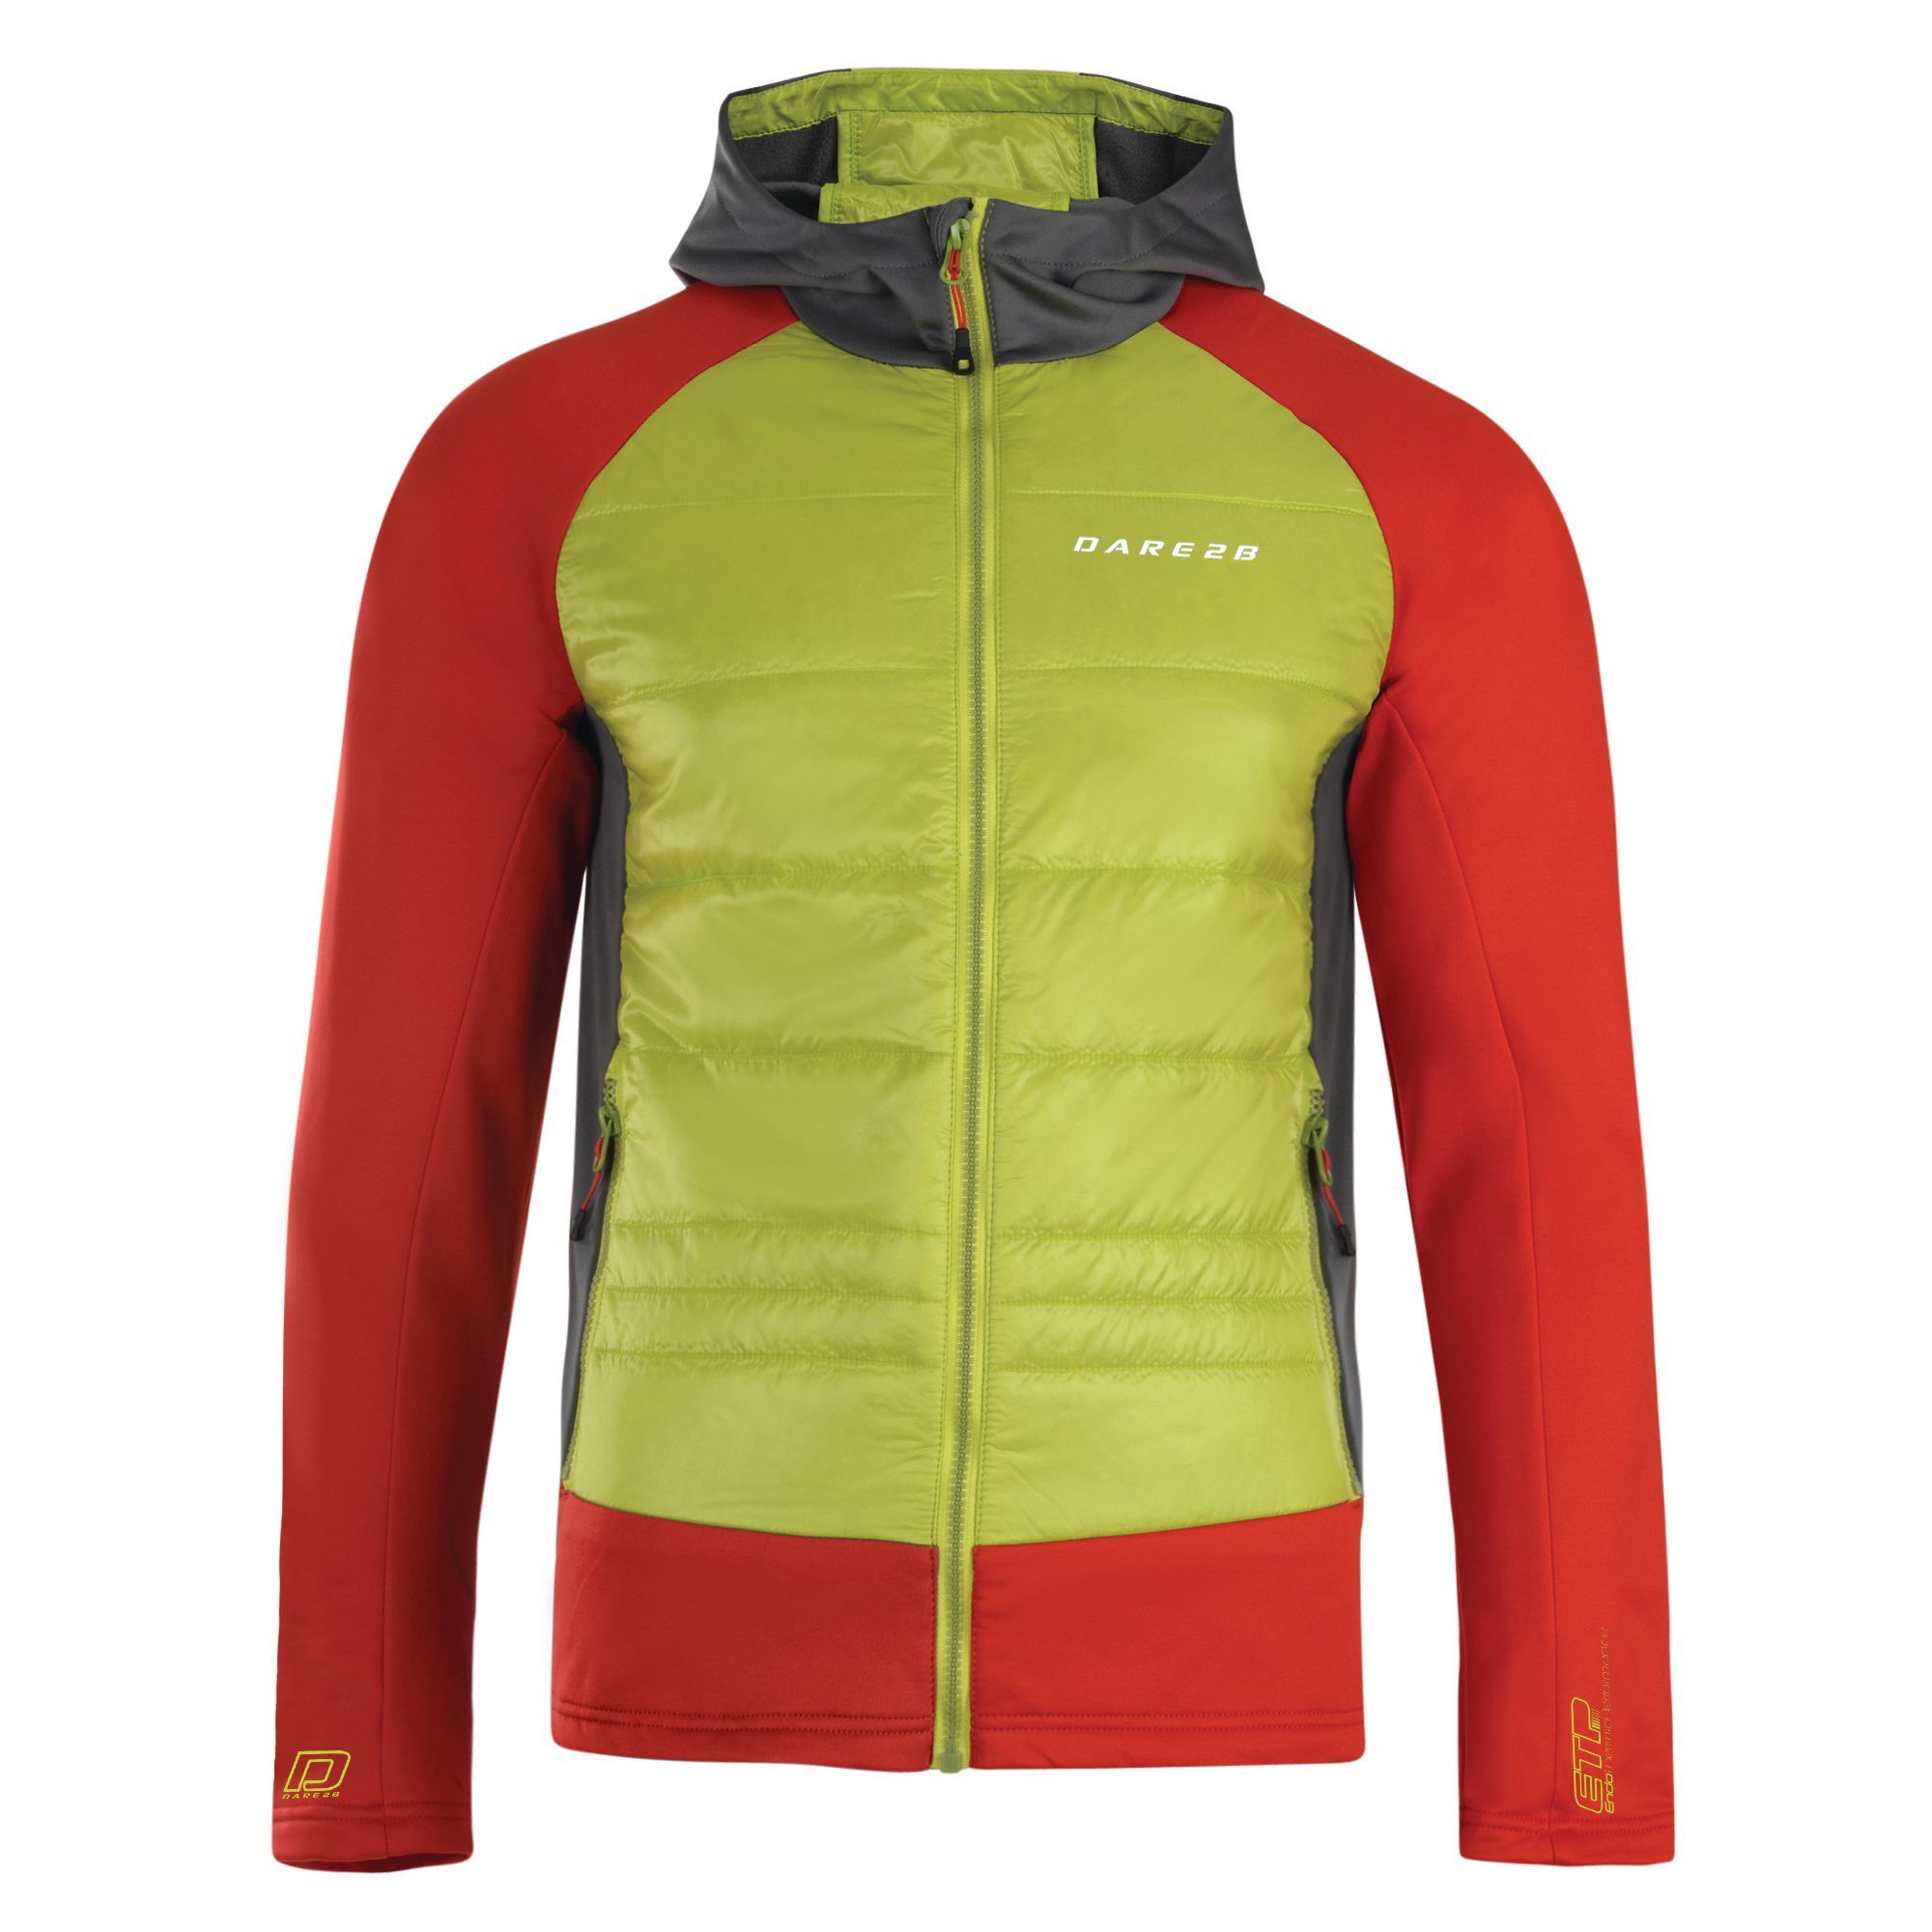 Inlay Hybrid jacket. EndoThermic Performance (ETP). Ilus Hybrid Microwarmth with polyester ripstop and core stretch mix. Alpaca wool mix insulation. Natural wicking and  odour control properties. Grown on hood. 2 x lower zip pockets. Materials: 100% Polyester.